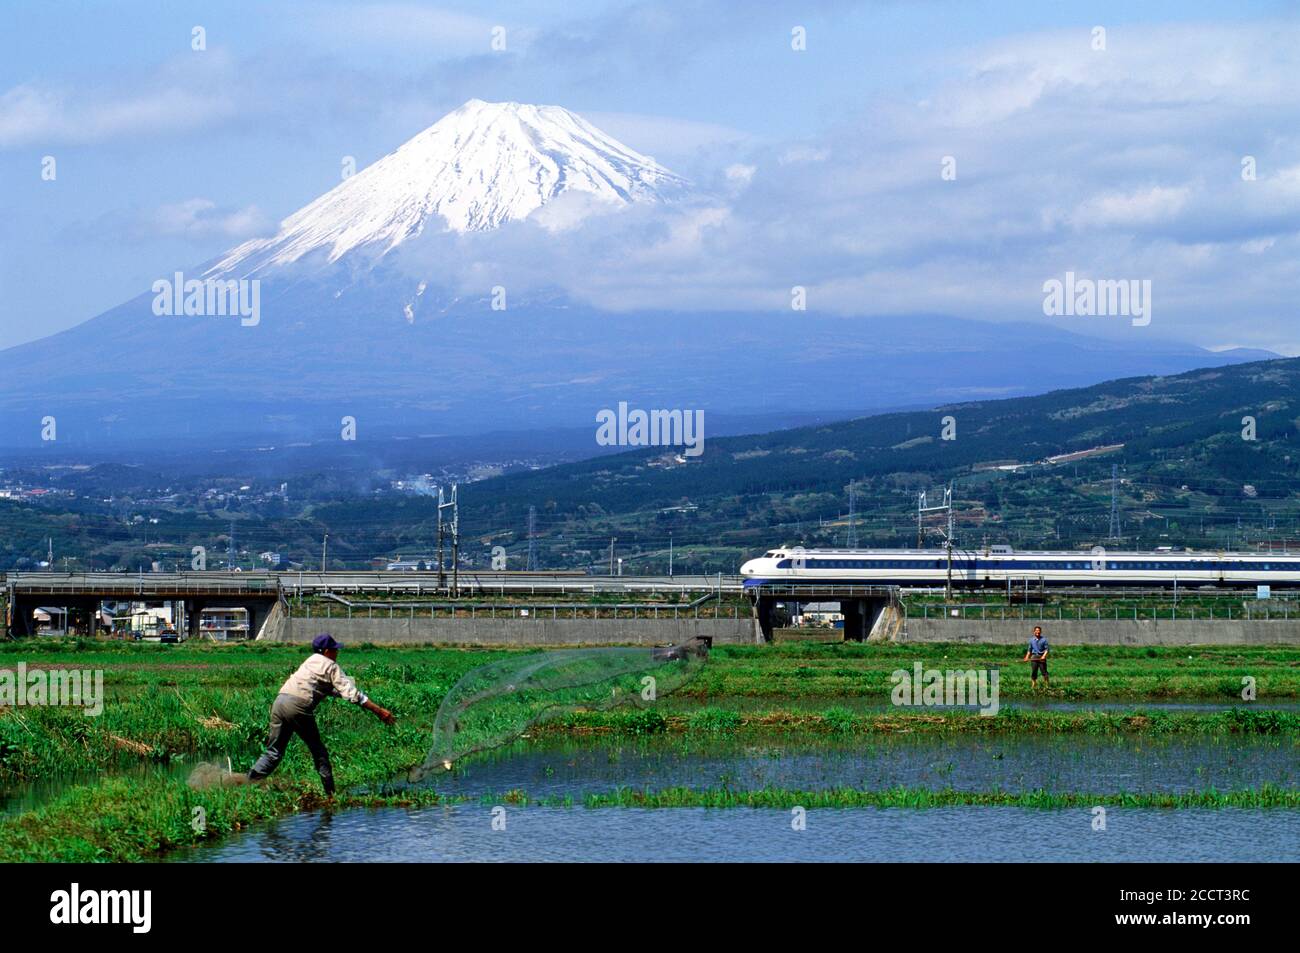 Shinkansen bullet train passing  flowers and rice paddies and farmer casing fish net into a rice paddy below snow capped Mount Fuji Stock Photo